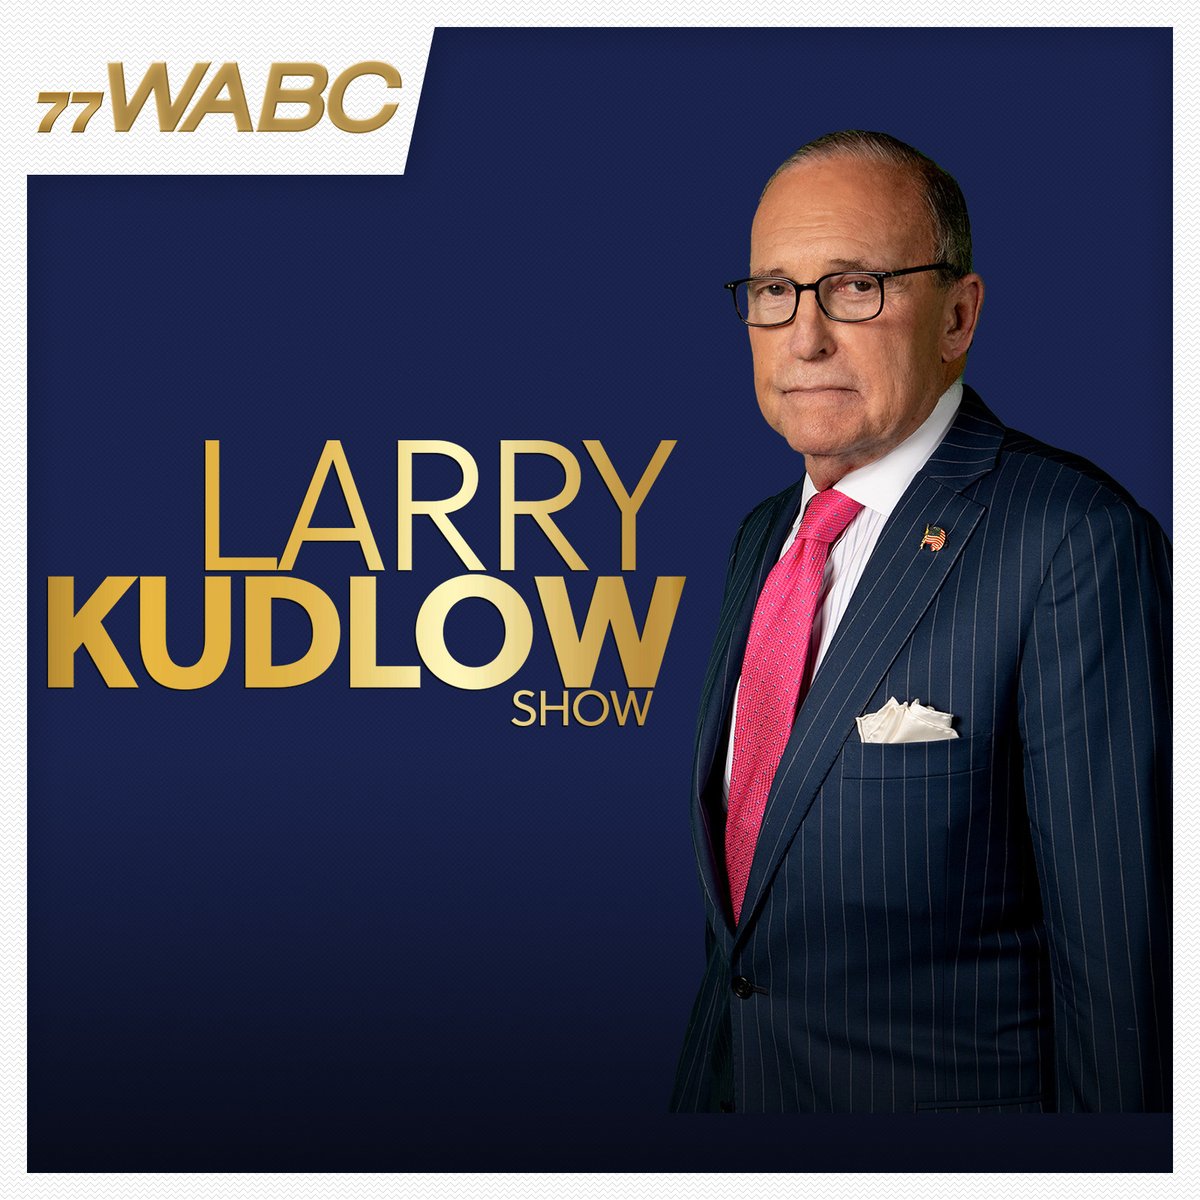 At 10AM EST: It's 'The @larry_kudlow Show!' Listen on 770AM or WABCRadio.com. Head to PriorityGoldResearch.com @PriorityGold to view the 2024 Gold Forecast: Election Year Edition